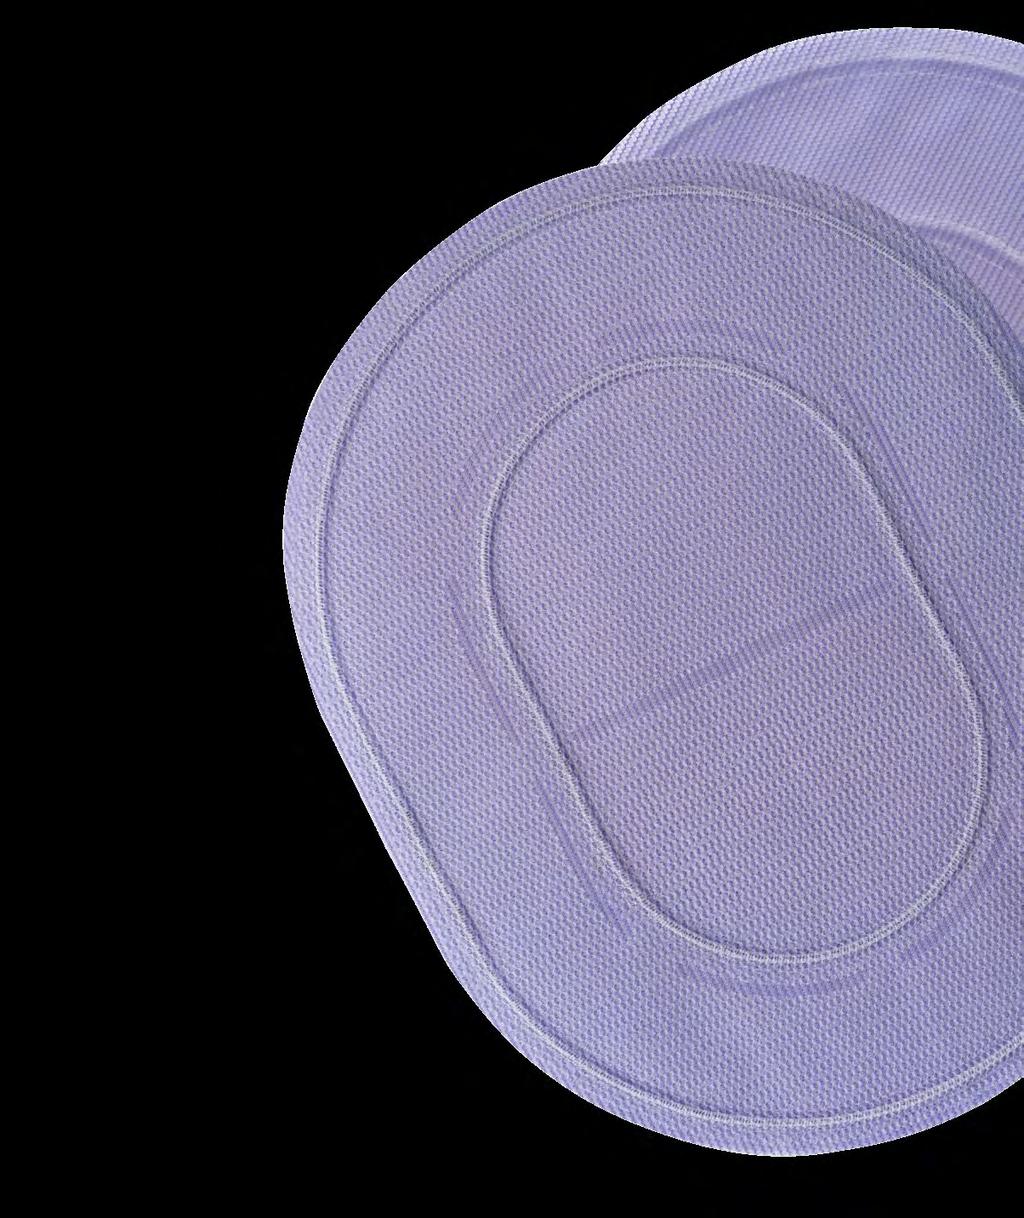 Proven The Ventrio ST Hernia Patch combines materials used in general surgery for many years to deliver